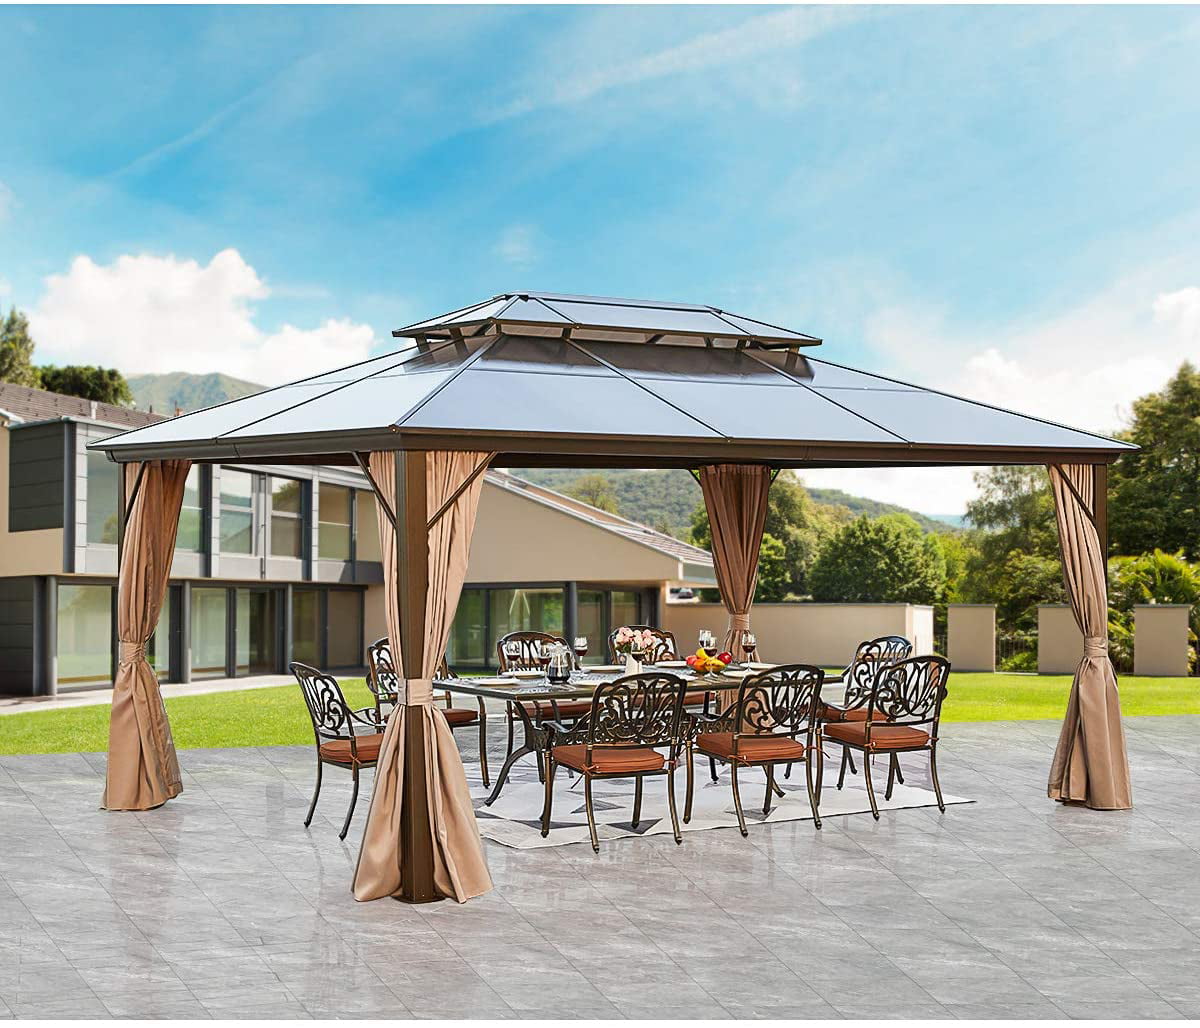 Monumart 3x3m Garden Gazebo Top Cover Roof Replacement Sun Proof Tent Canopy Pavilion Roof Beige/Wine Red/Blue Beige